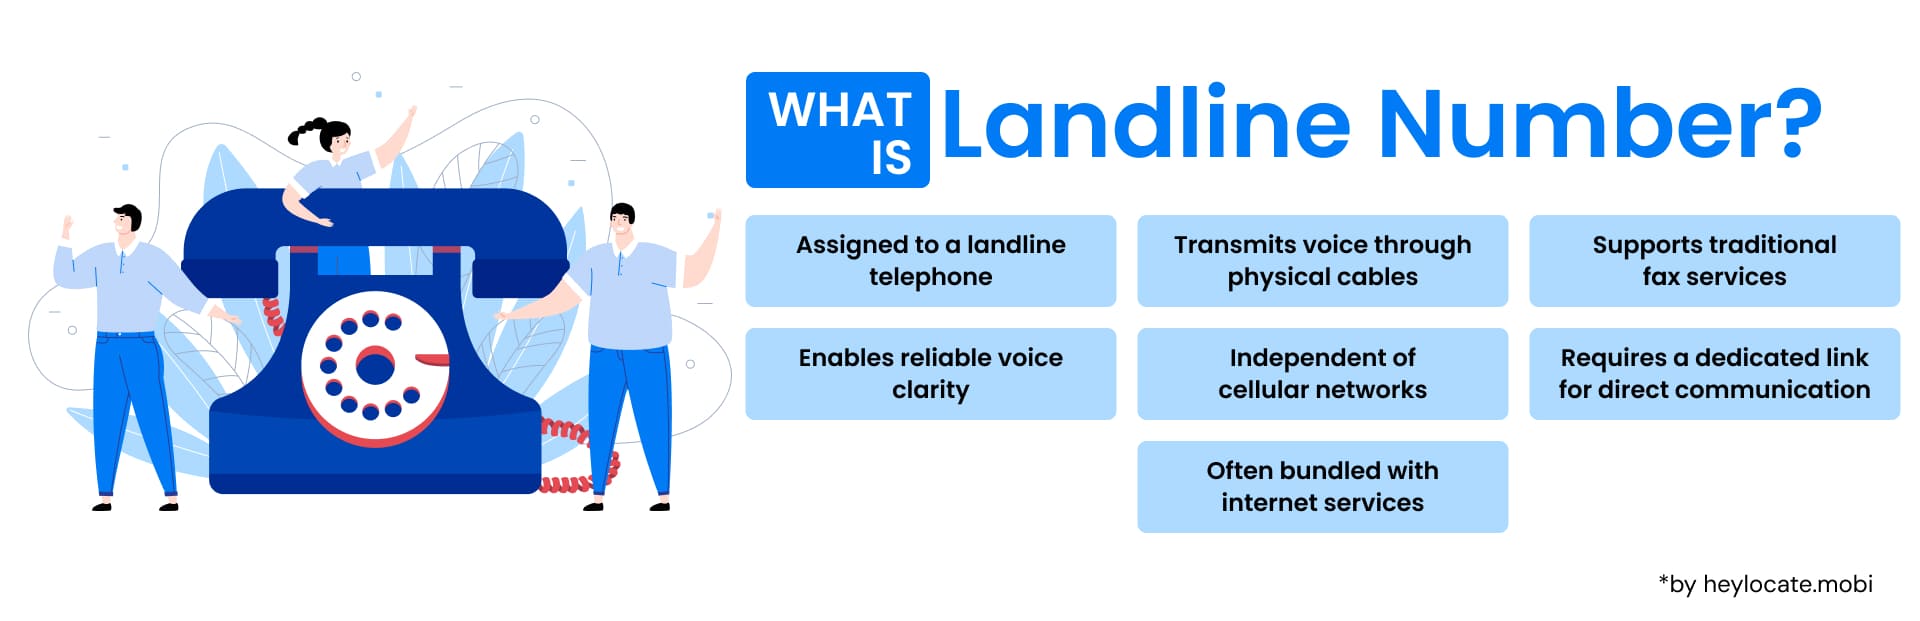 A look into what a landline number is, its consistent reliability, and its role in communication